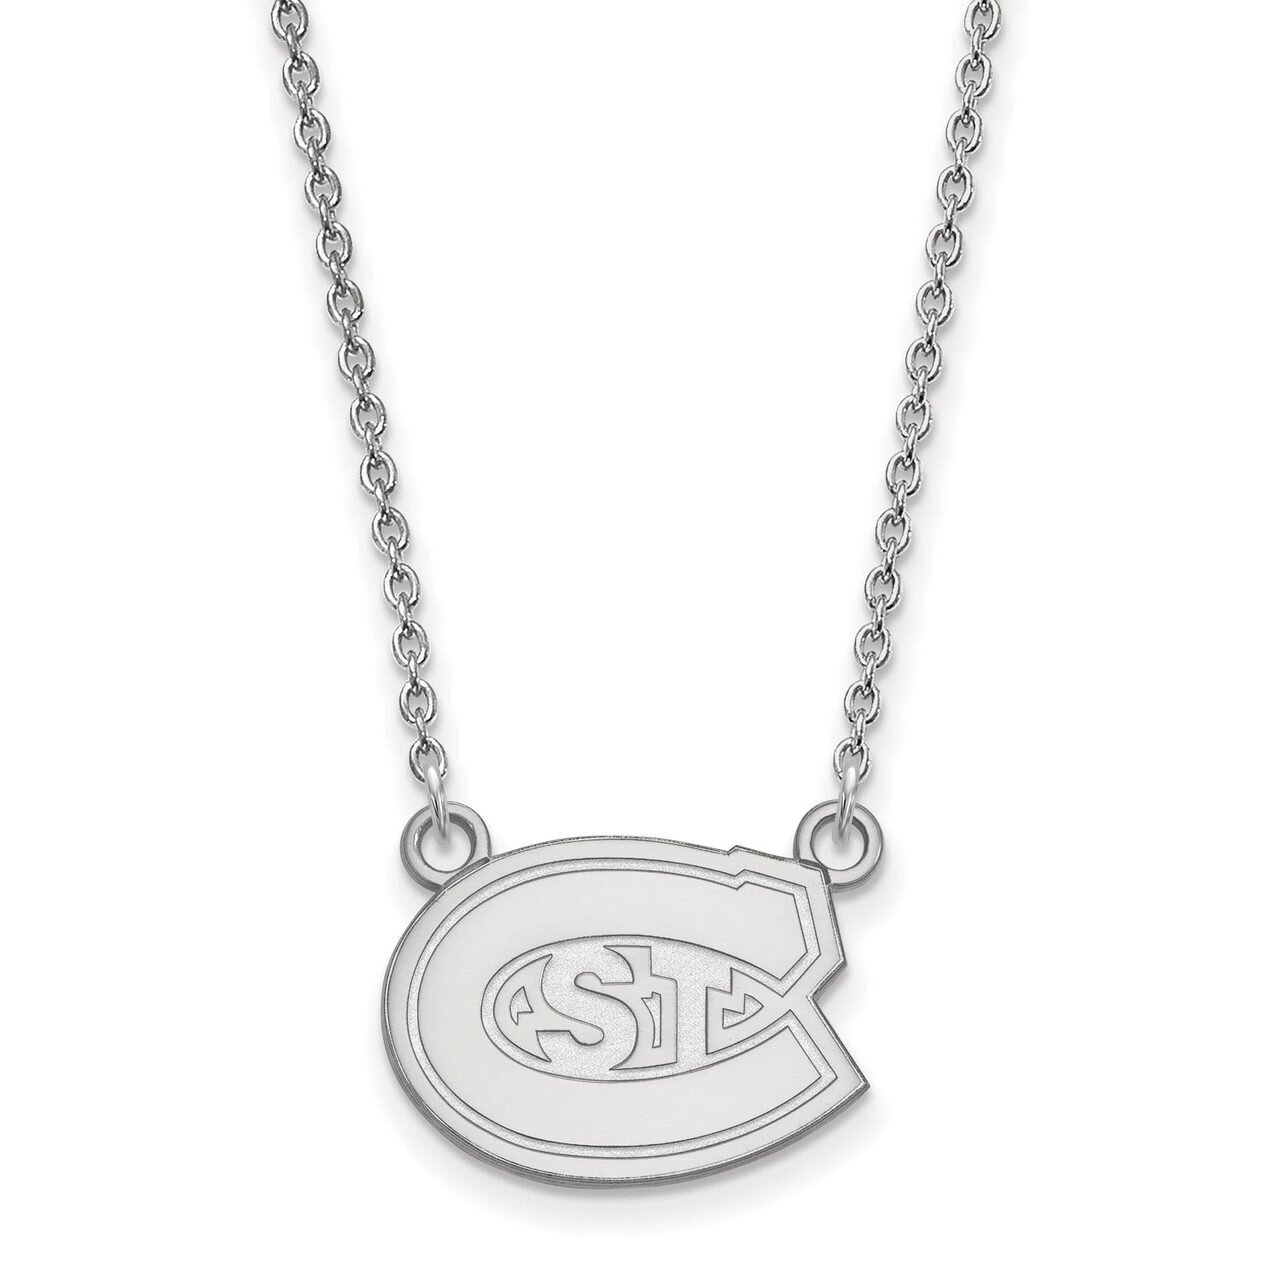 Saint Cloud State Small Pendant with Chain Necklace 14k White Gold 4W008STC-18